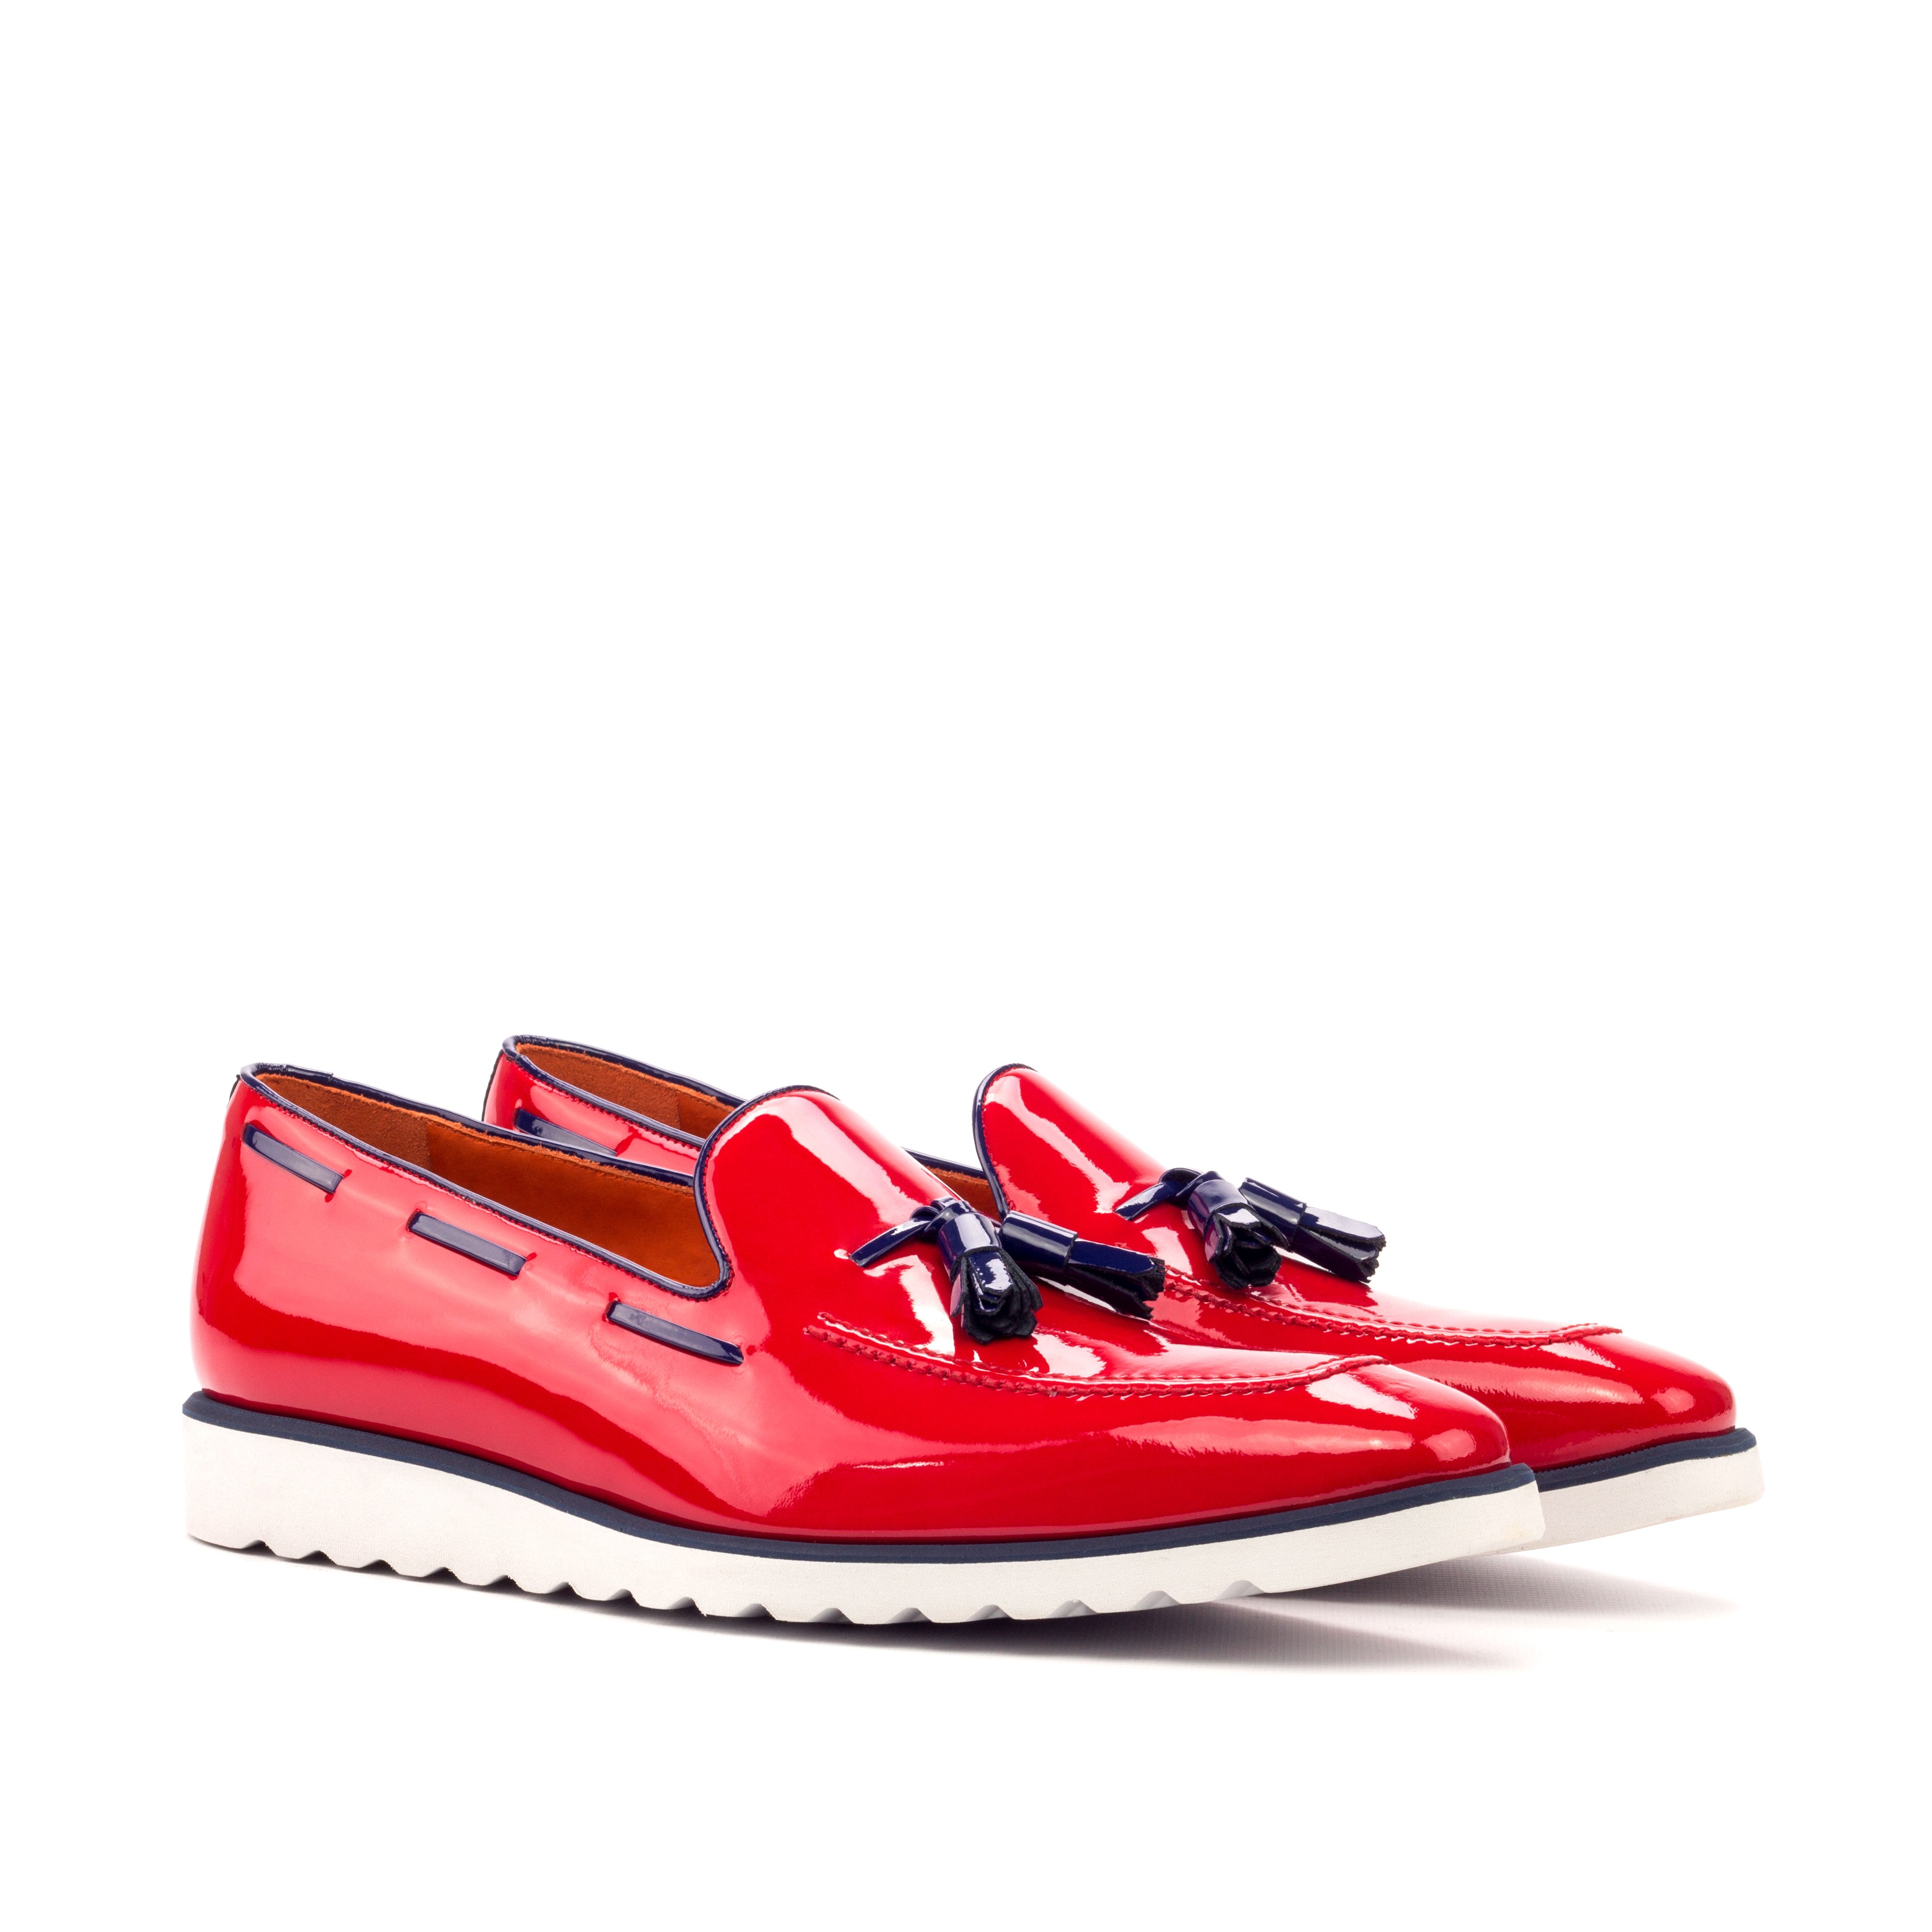 Red Patent Loafer with Sport Wedge Sole